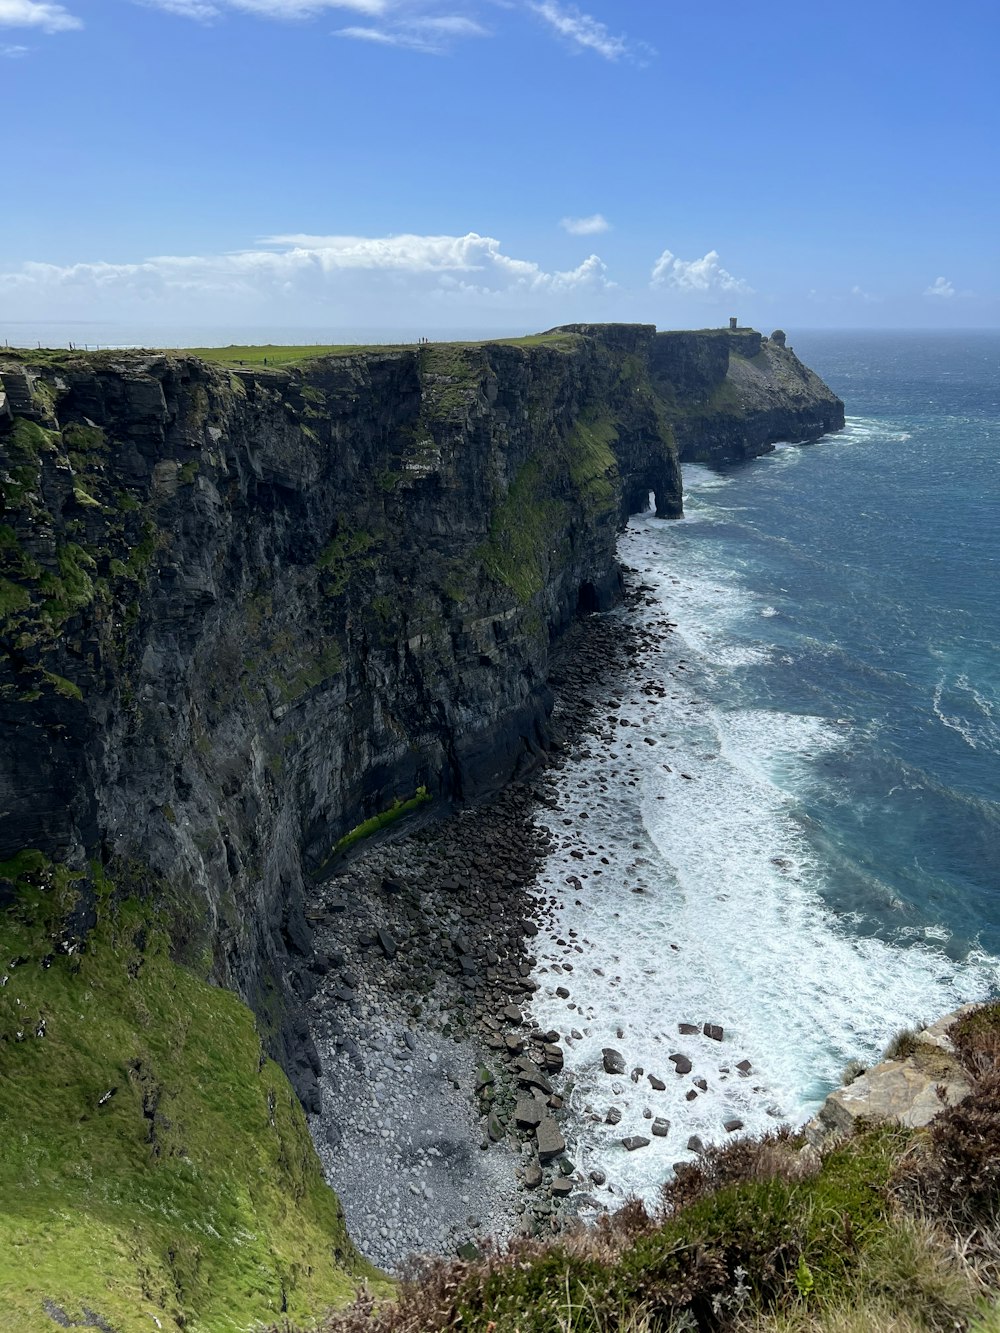 a rocky cliff next to a body of water with Cliffs of Moher in the background